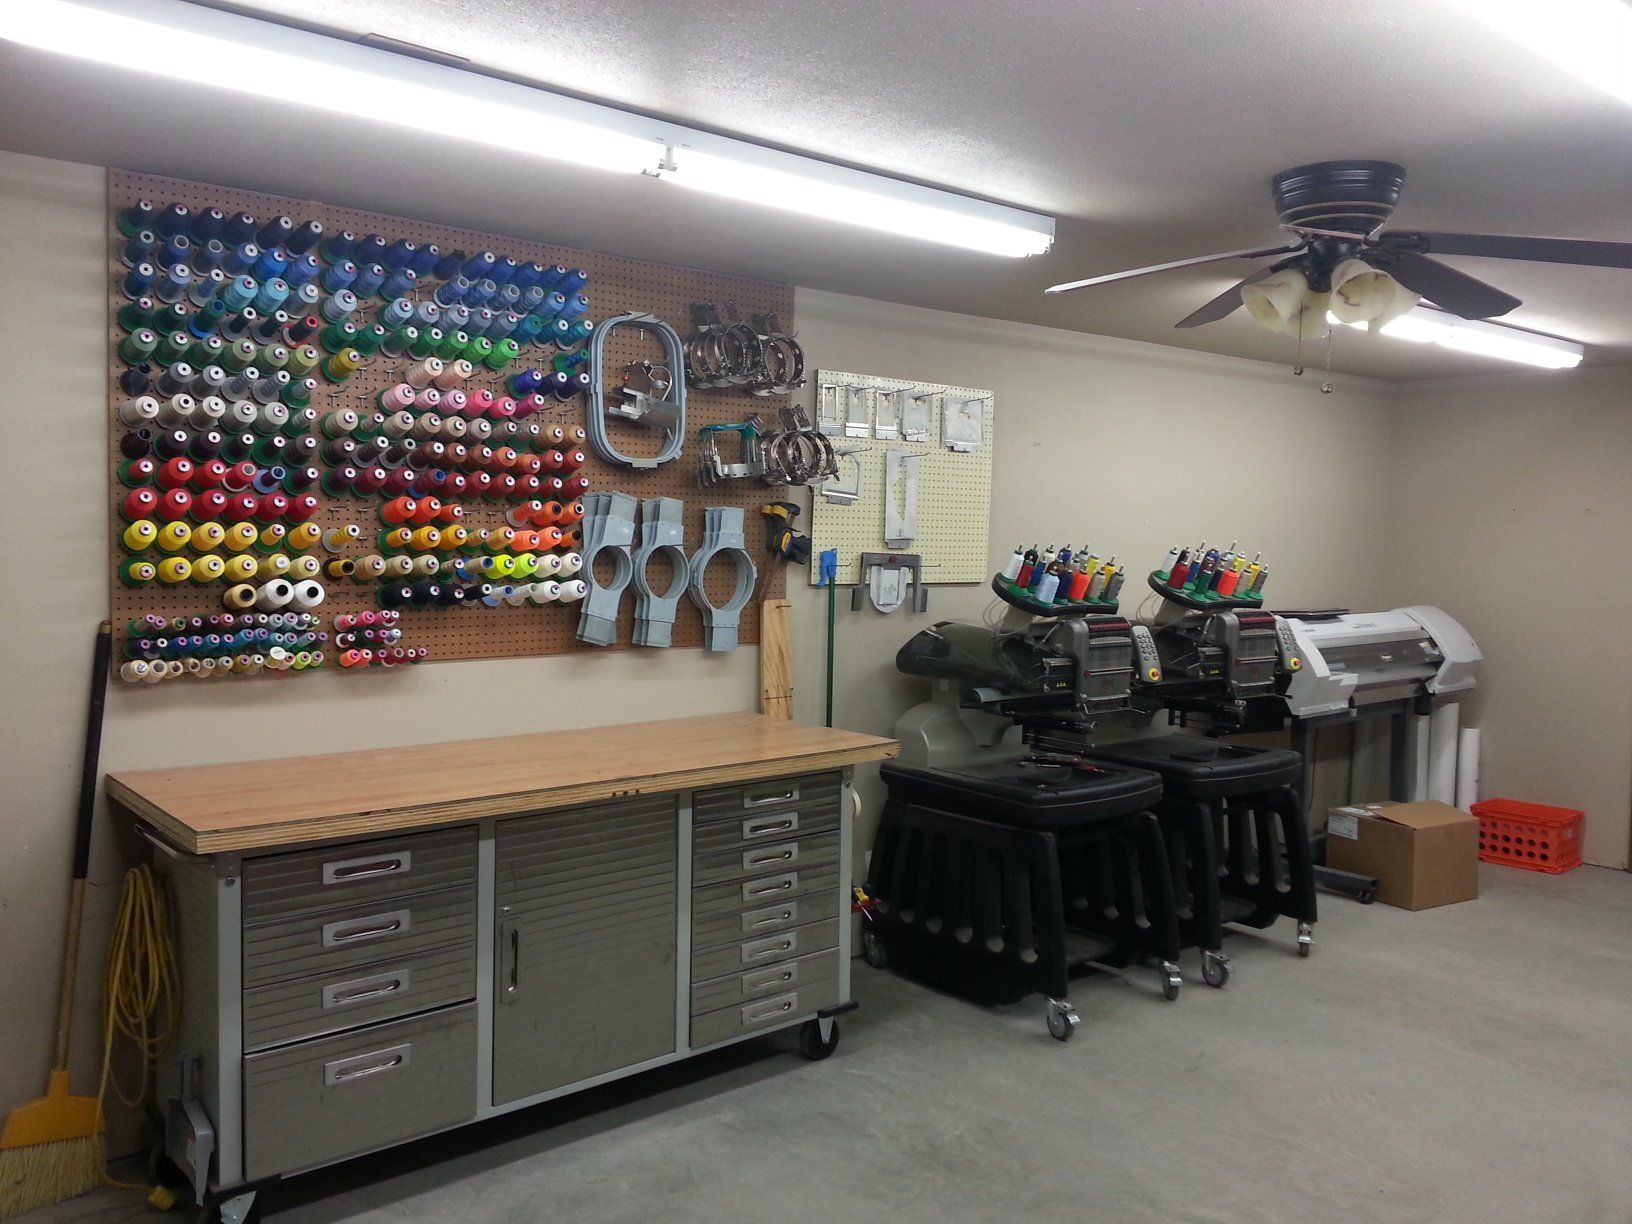 wall of colorful embroidery thread options, two embroidery machines and vinyl graphics applicator